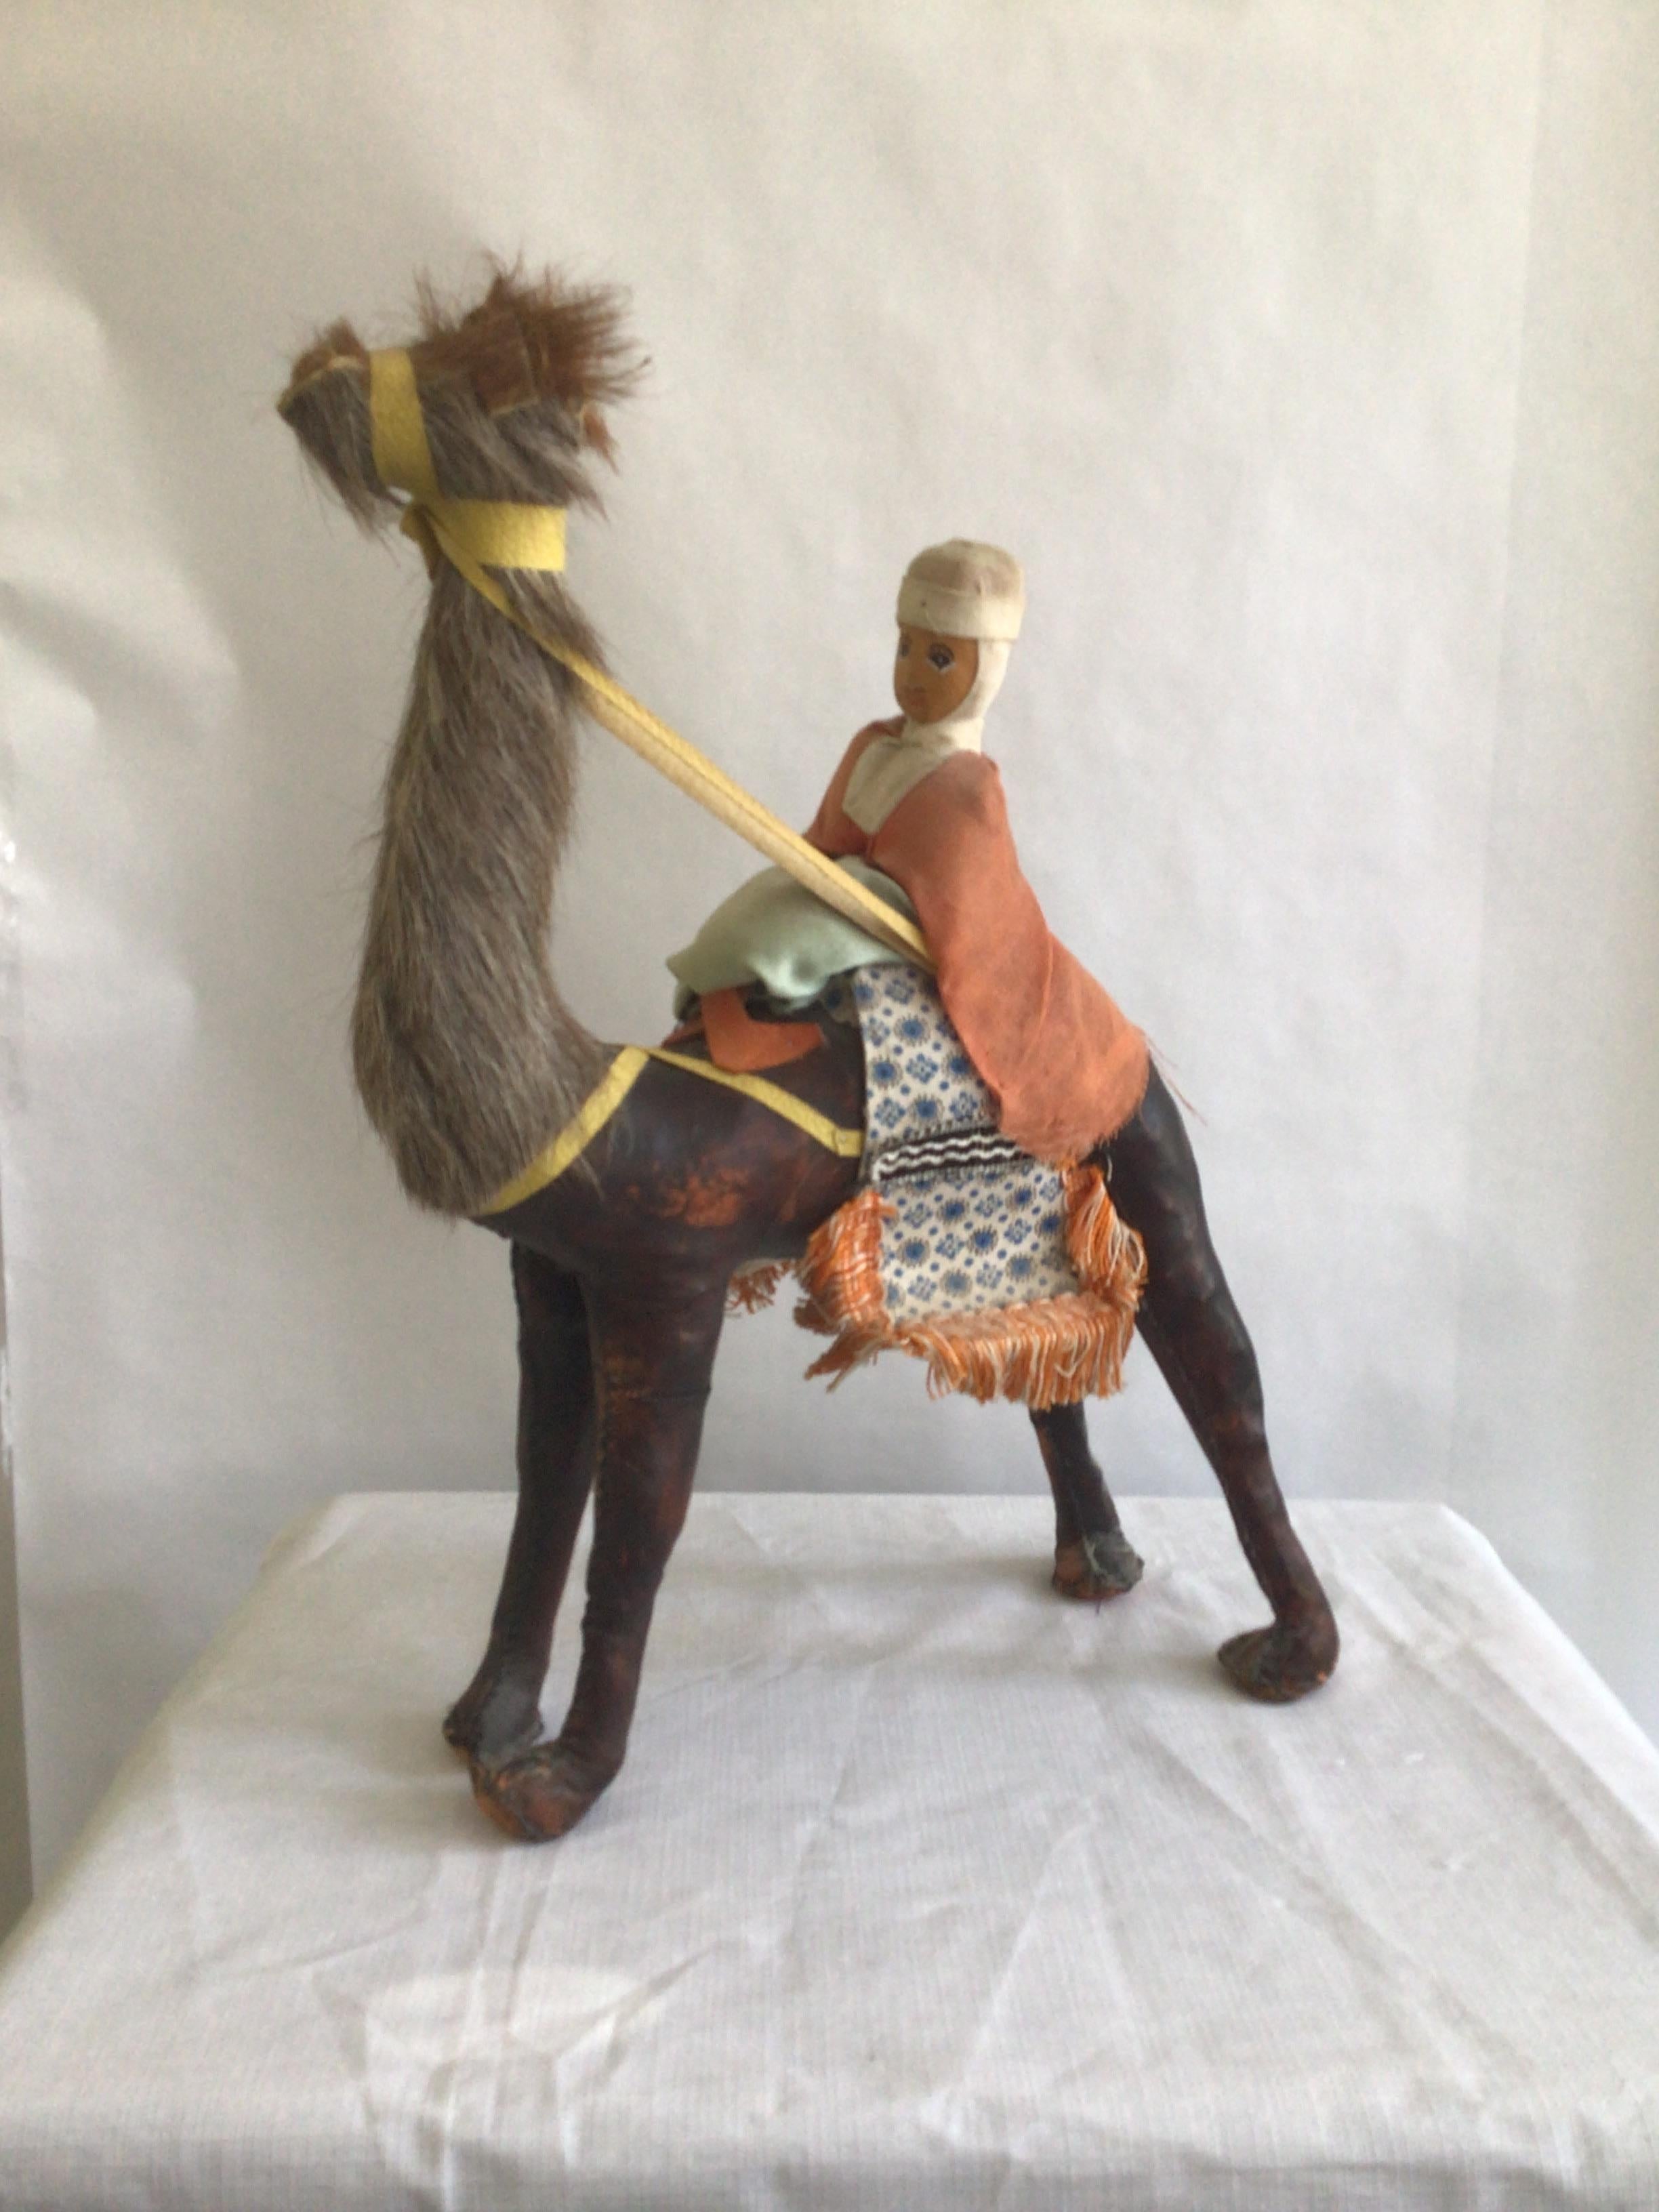 1960s Leather Camel With Rider
Real fur 
Hand-sewn
Beautiful fabric detail and trimming
